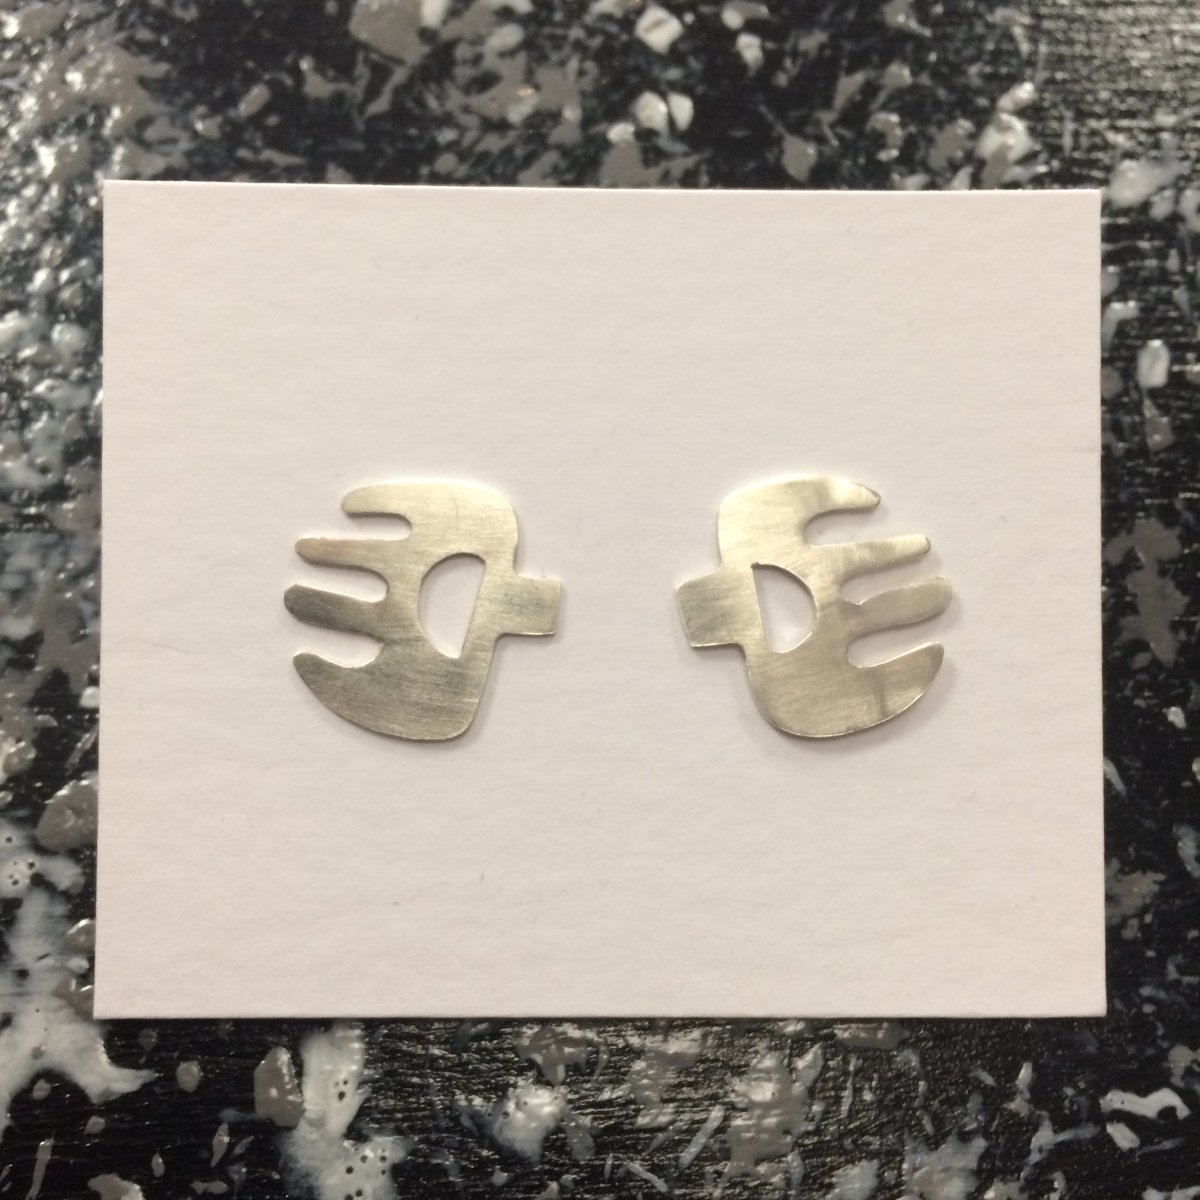 Beautiful stud earrings designed and made from recycled silver by Corrinne in Devon #ConsciousConsumers #FrancisRoad